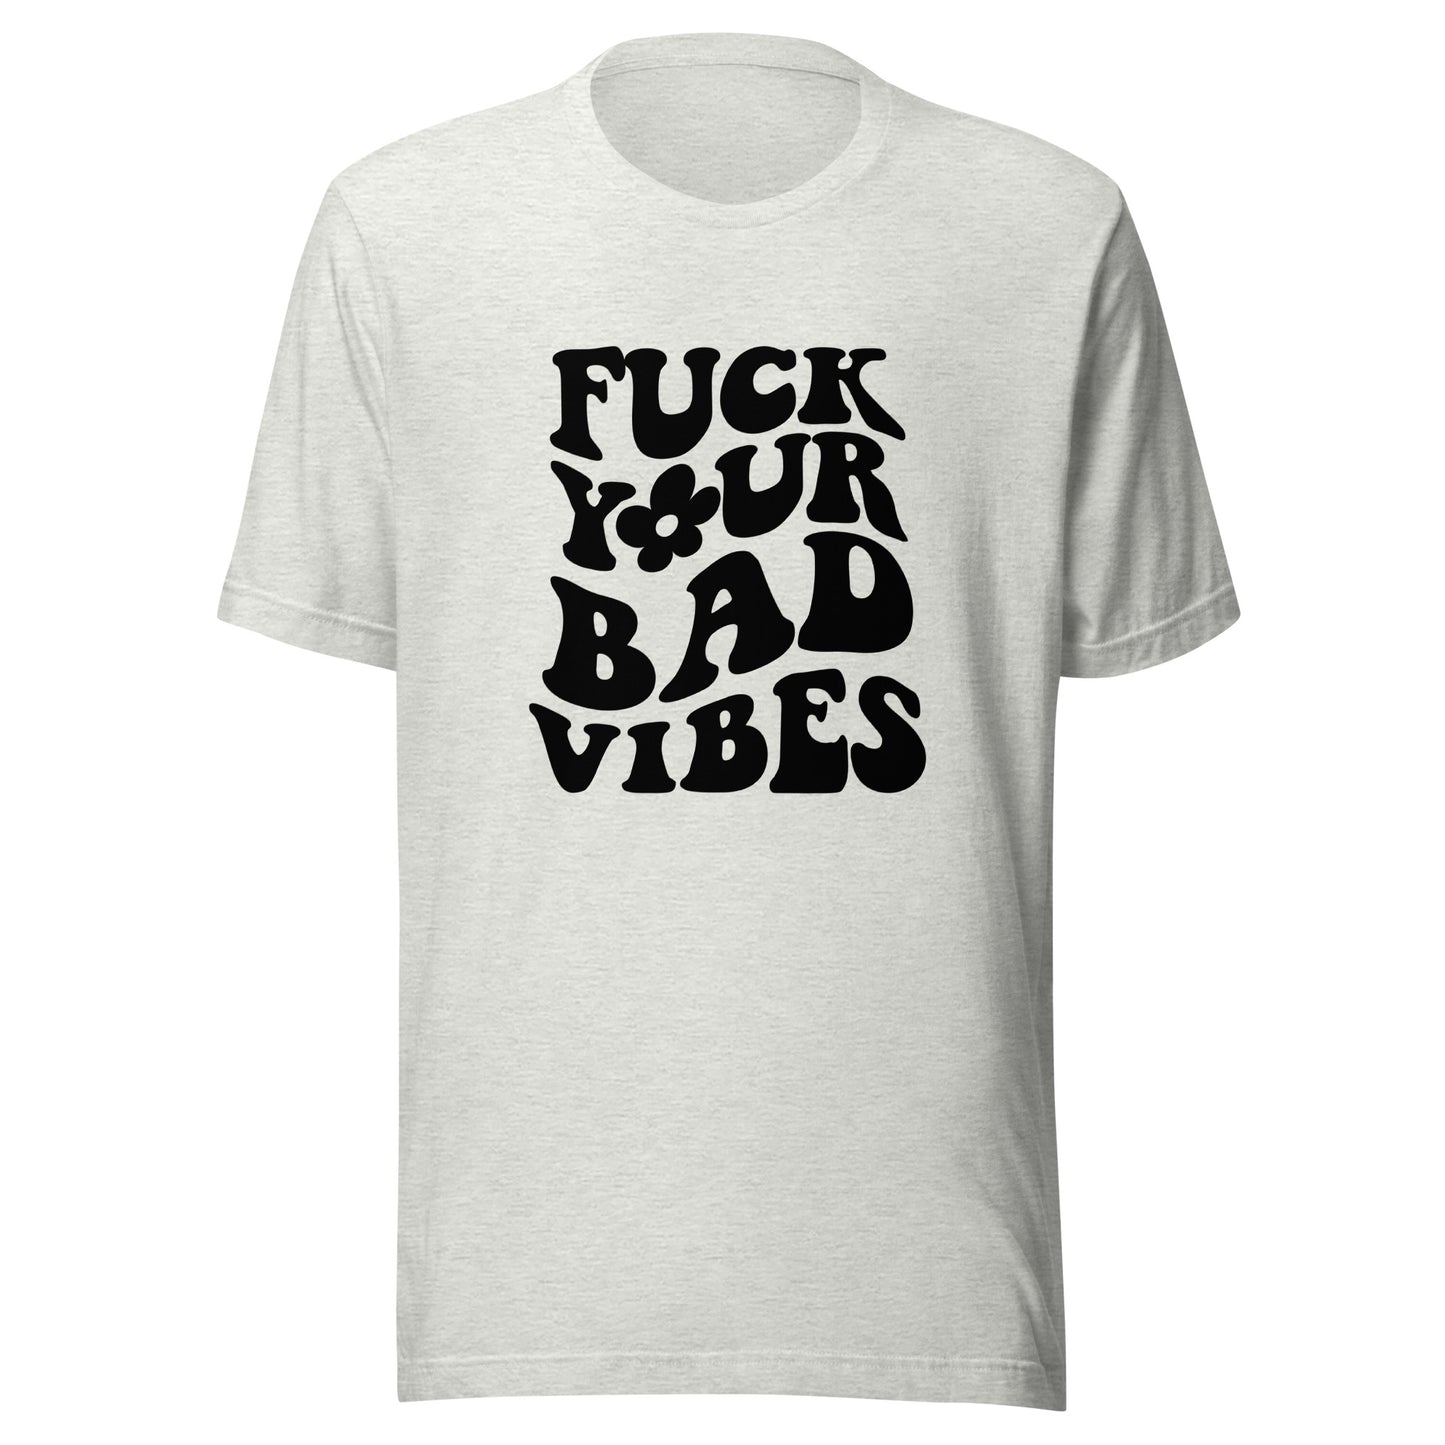 Fuck your bad vibes t-shirt